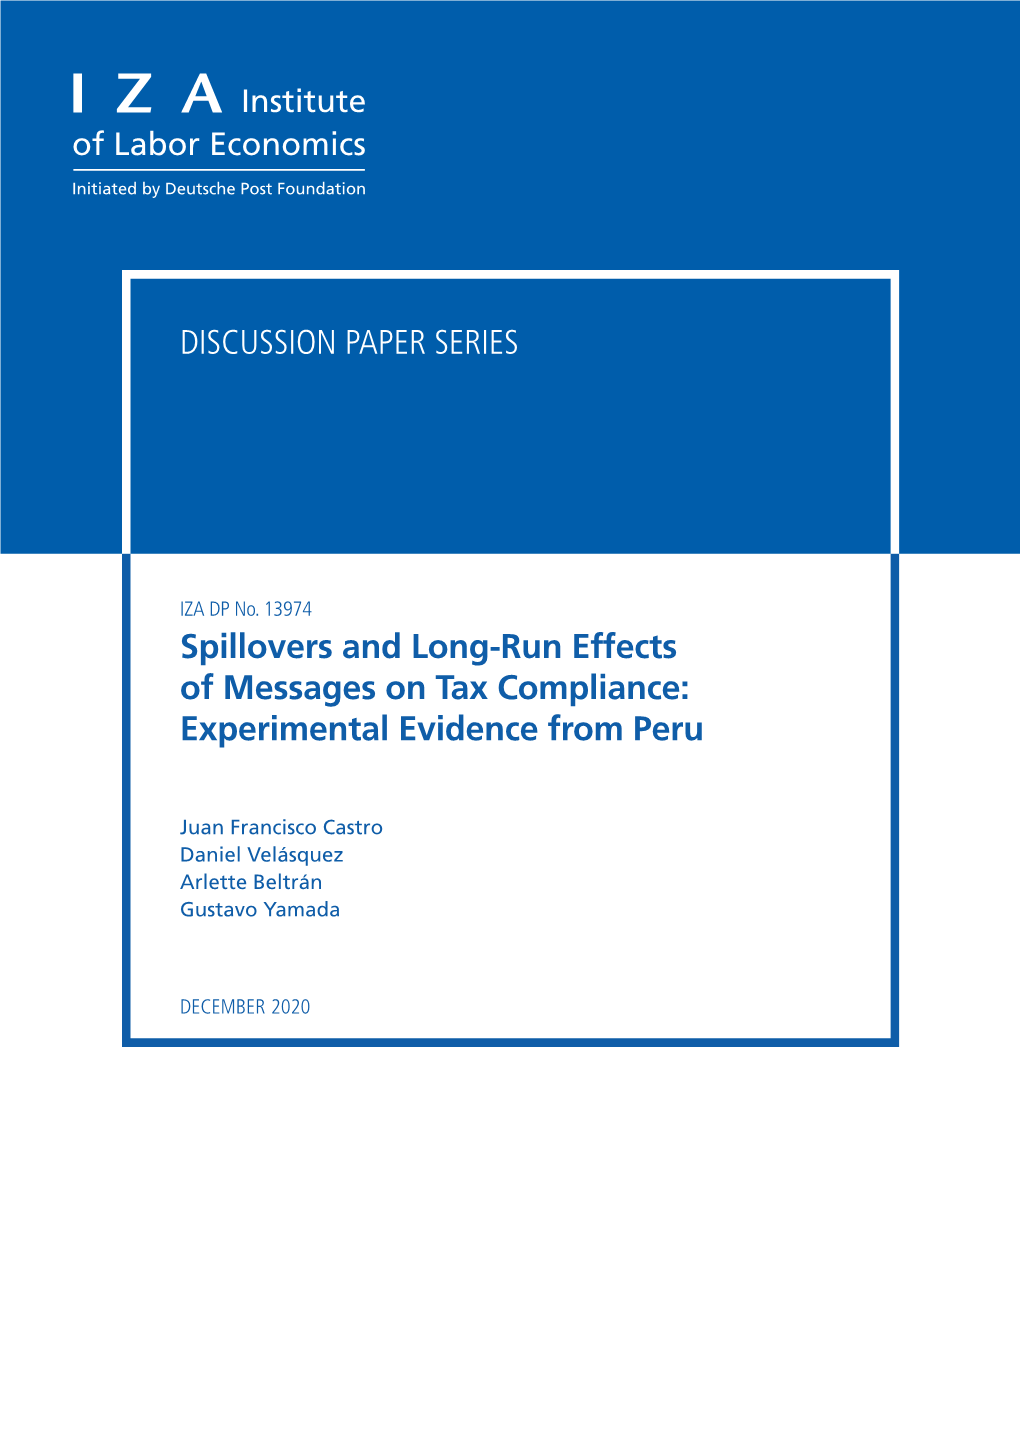 Spillovers and Long-Run Effects of Messages on Tax Compliance: Experimental Evidence from Peru